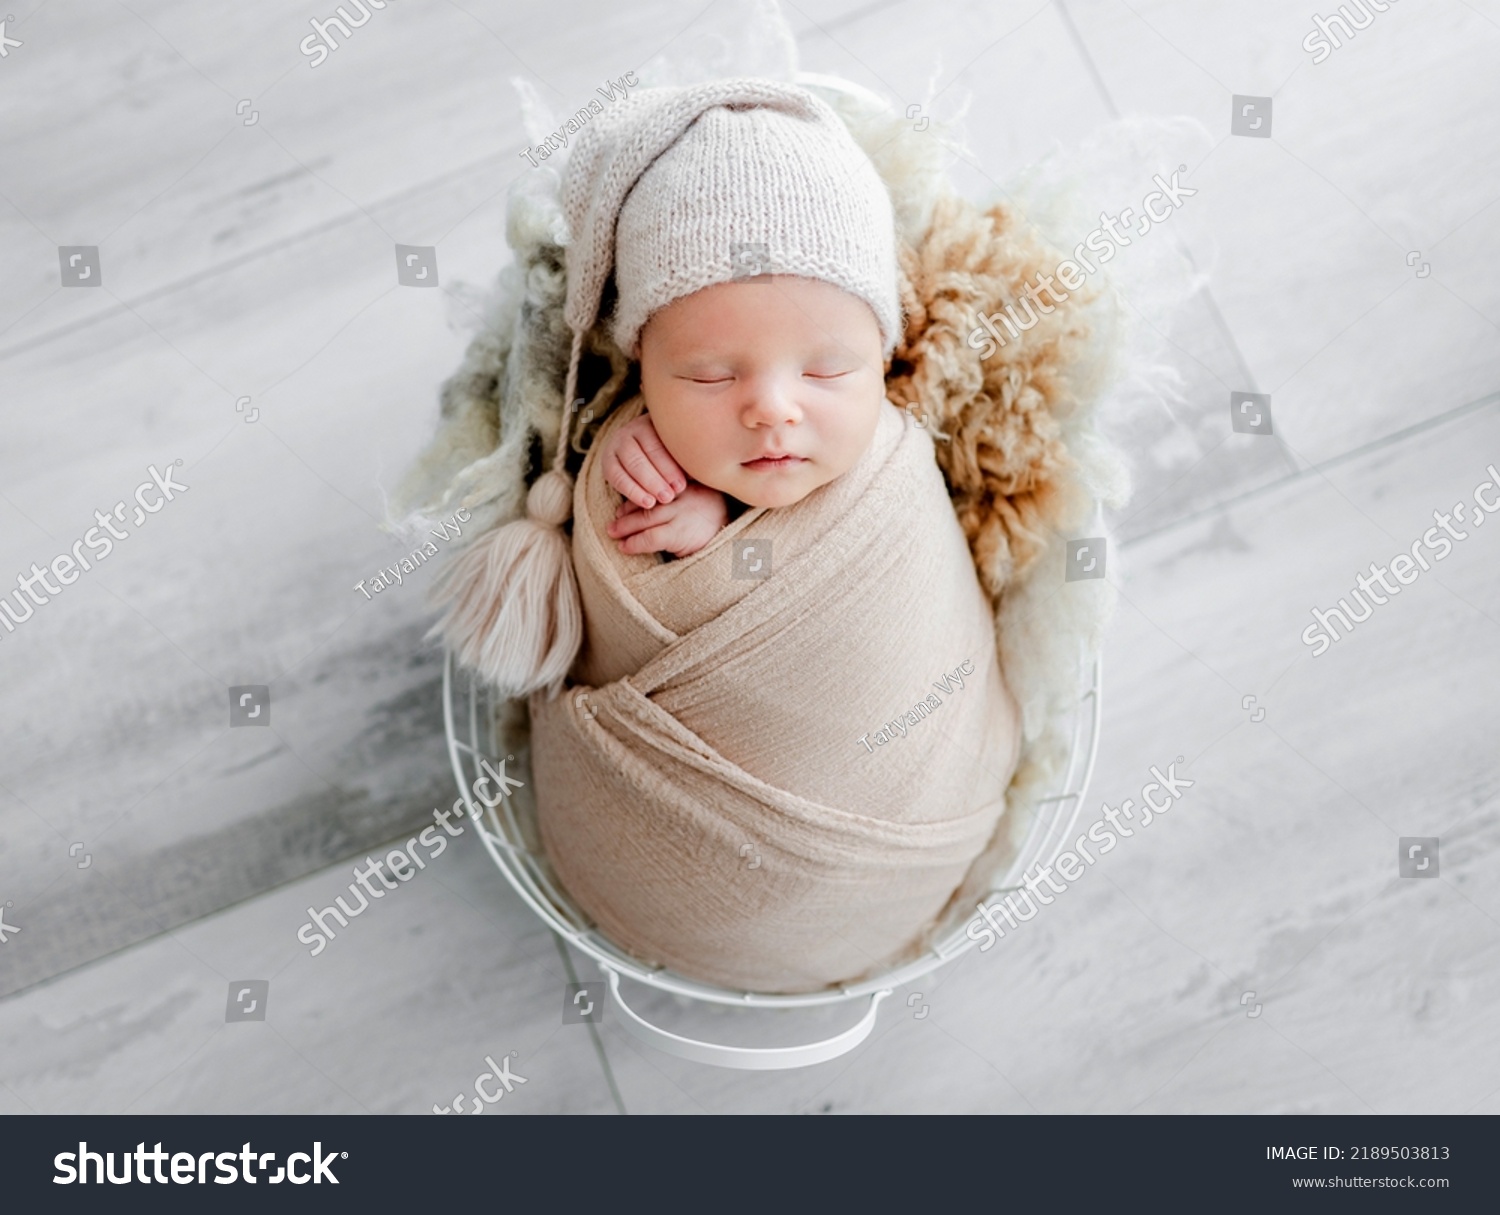 Newborn baby child swaddled in fabric sleeping in basket. Sweet infant kid napping portrait #2189503813